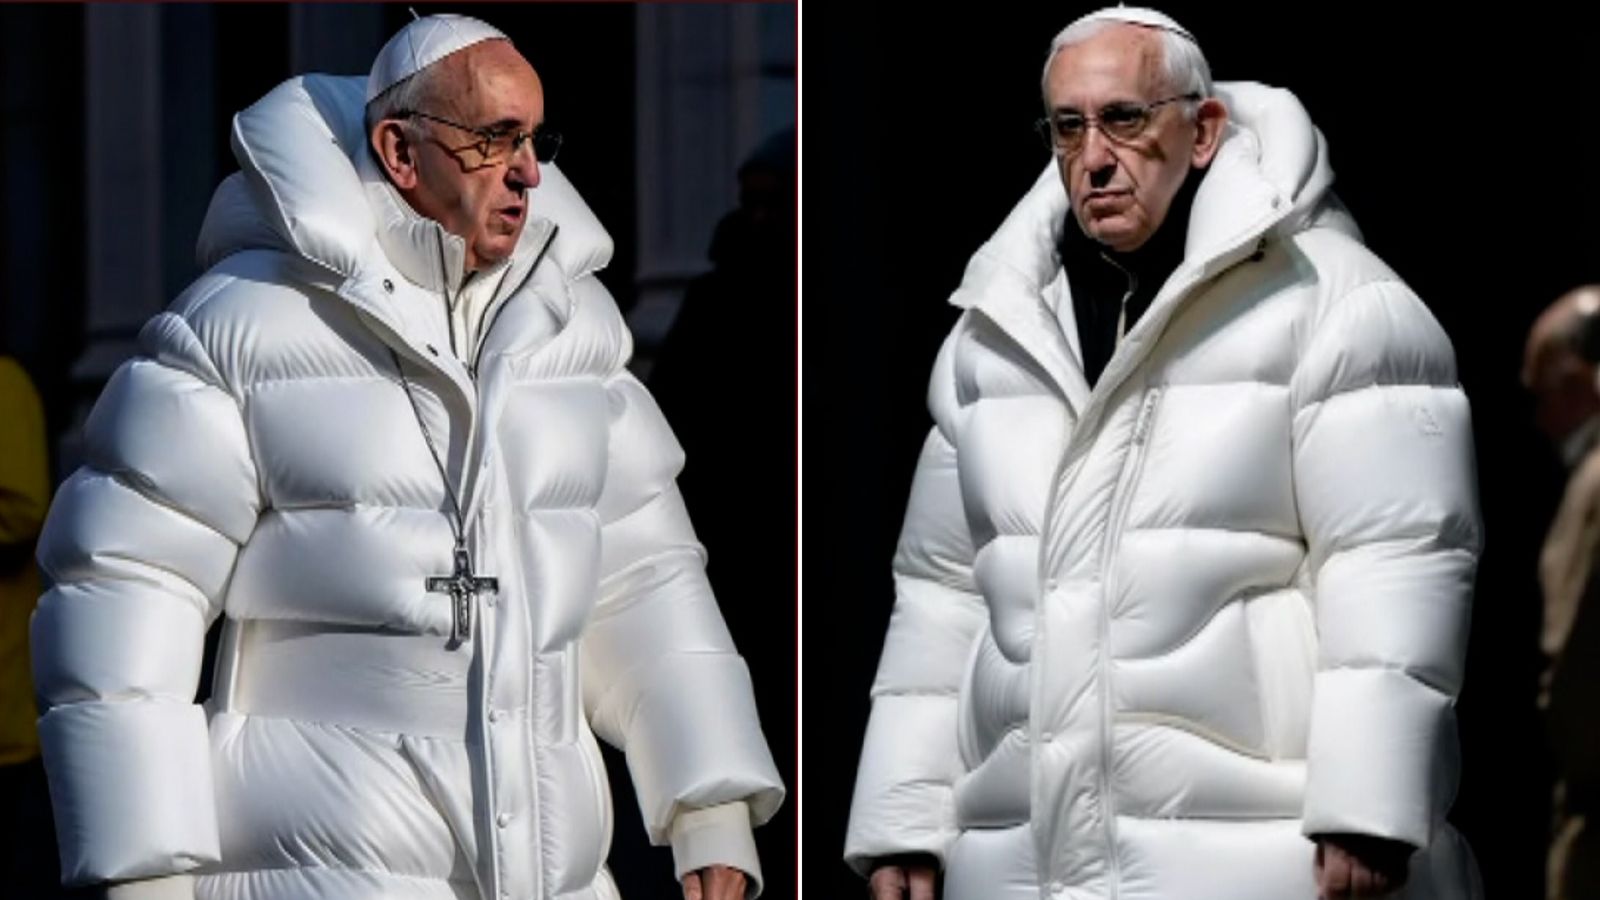 Teddy Fresh on X: Pope Francis rocking our Winter 2023 full body puffer.  The Vatican hit us up last year asking if they could get a sneak peak at  our winter wear